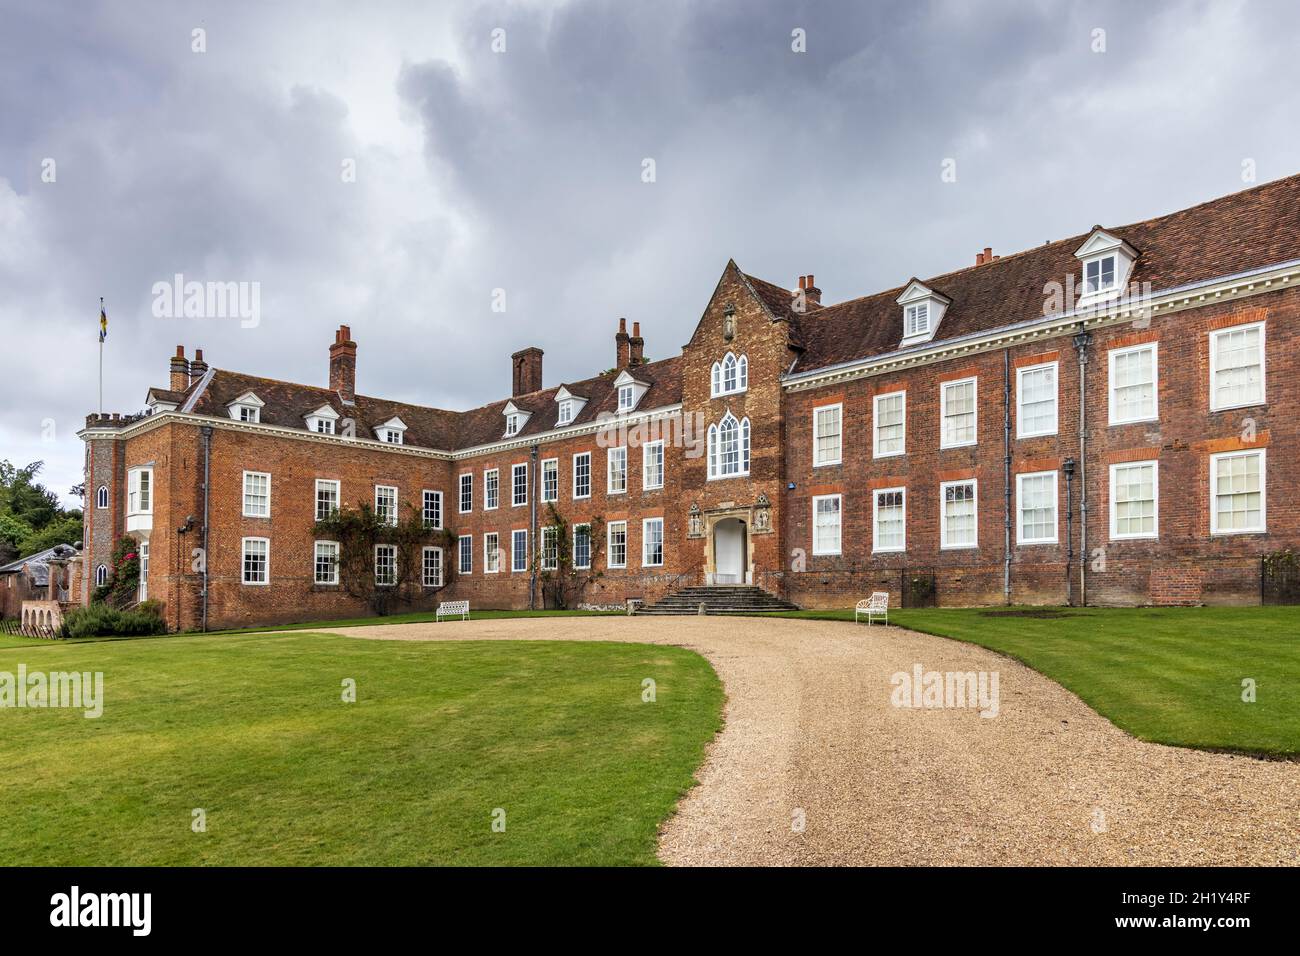 Stonor House, a historic country house in Stonor Park, situated in a valley in the Chiltern Hills near Henley-on-Thames, England. Stock Photo